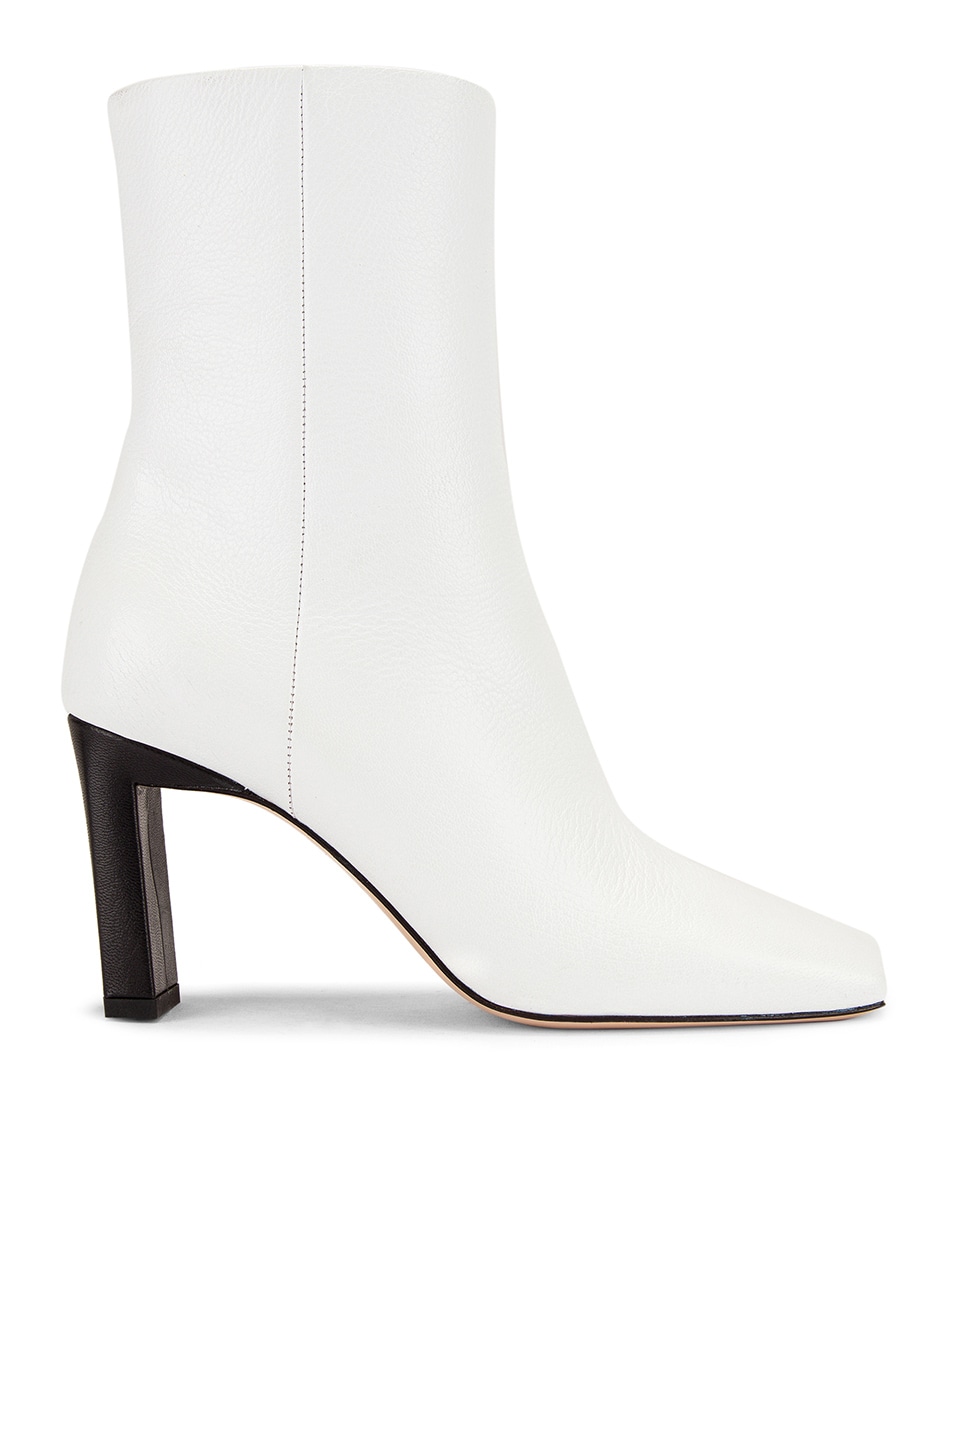 Image 1 of Wandler Isa Boots in Cyber White & Black